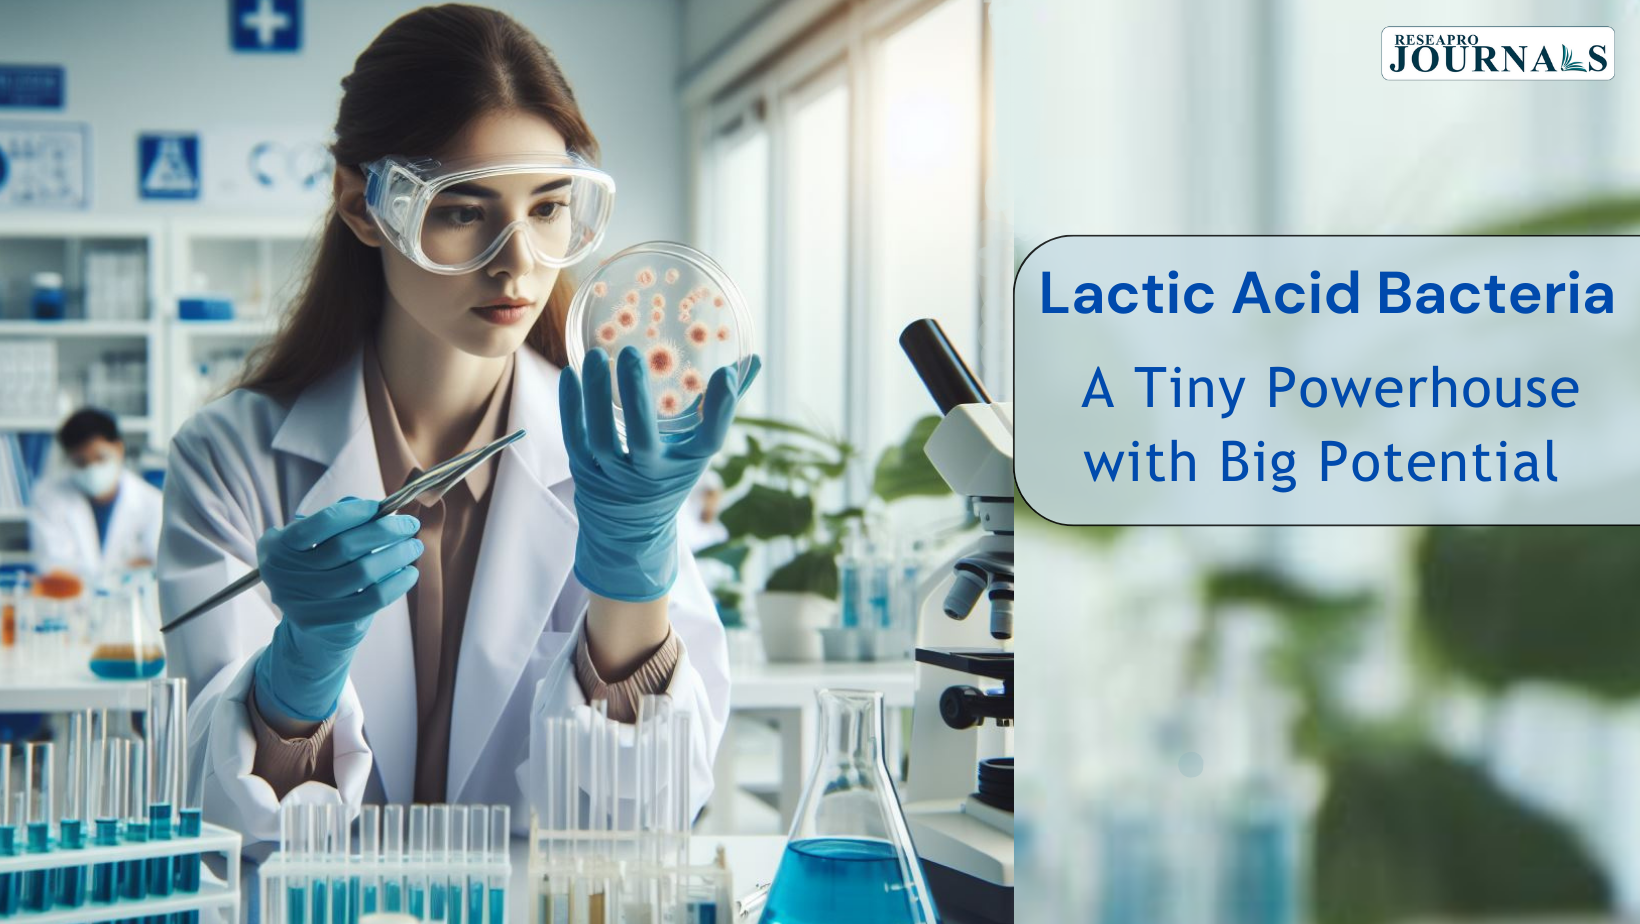 Lactic Acid Bacteria: A Tiny Powerhouse with Big Potential